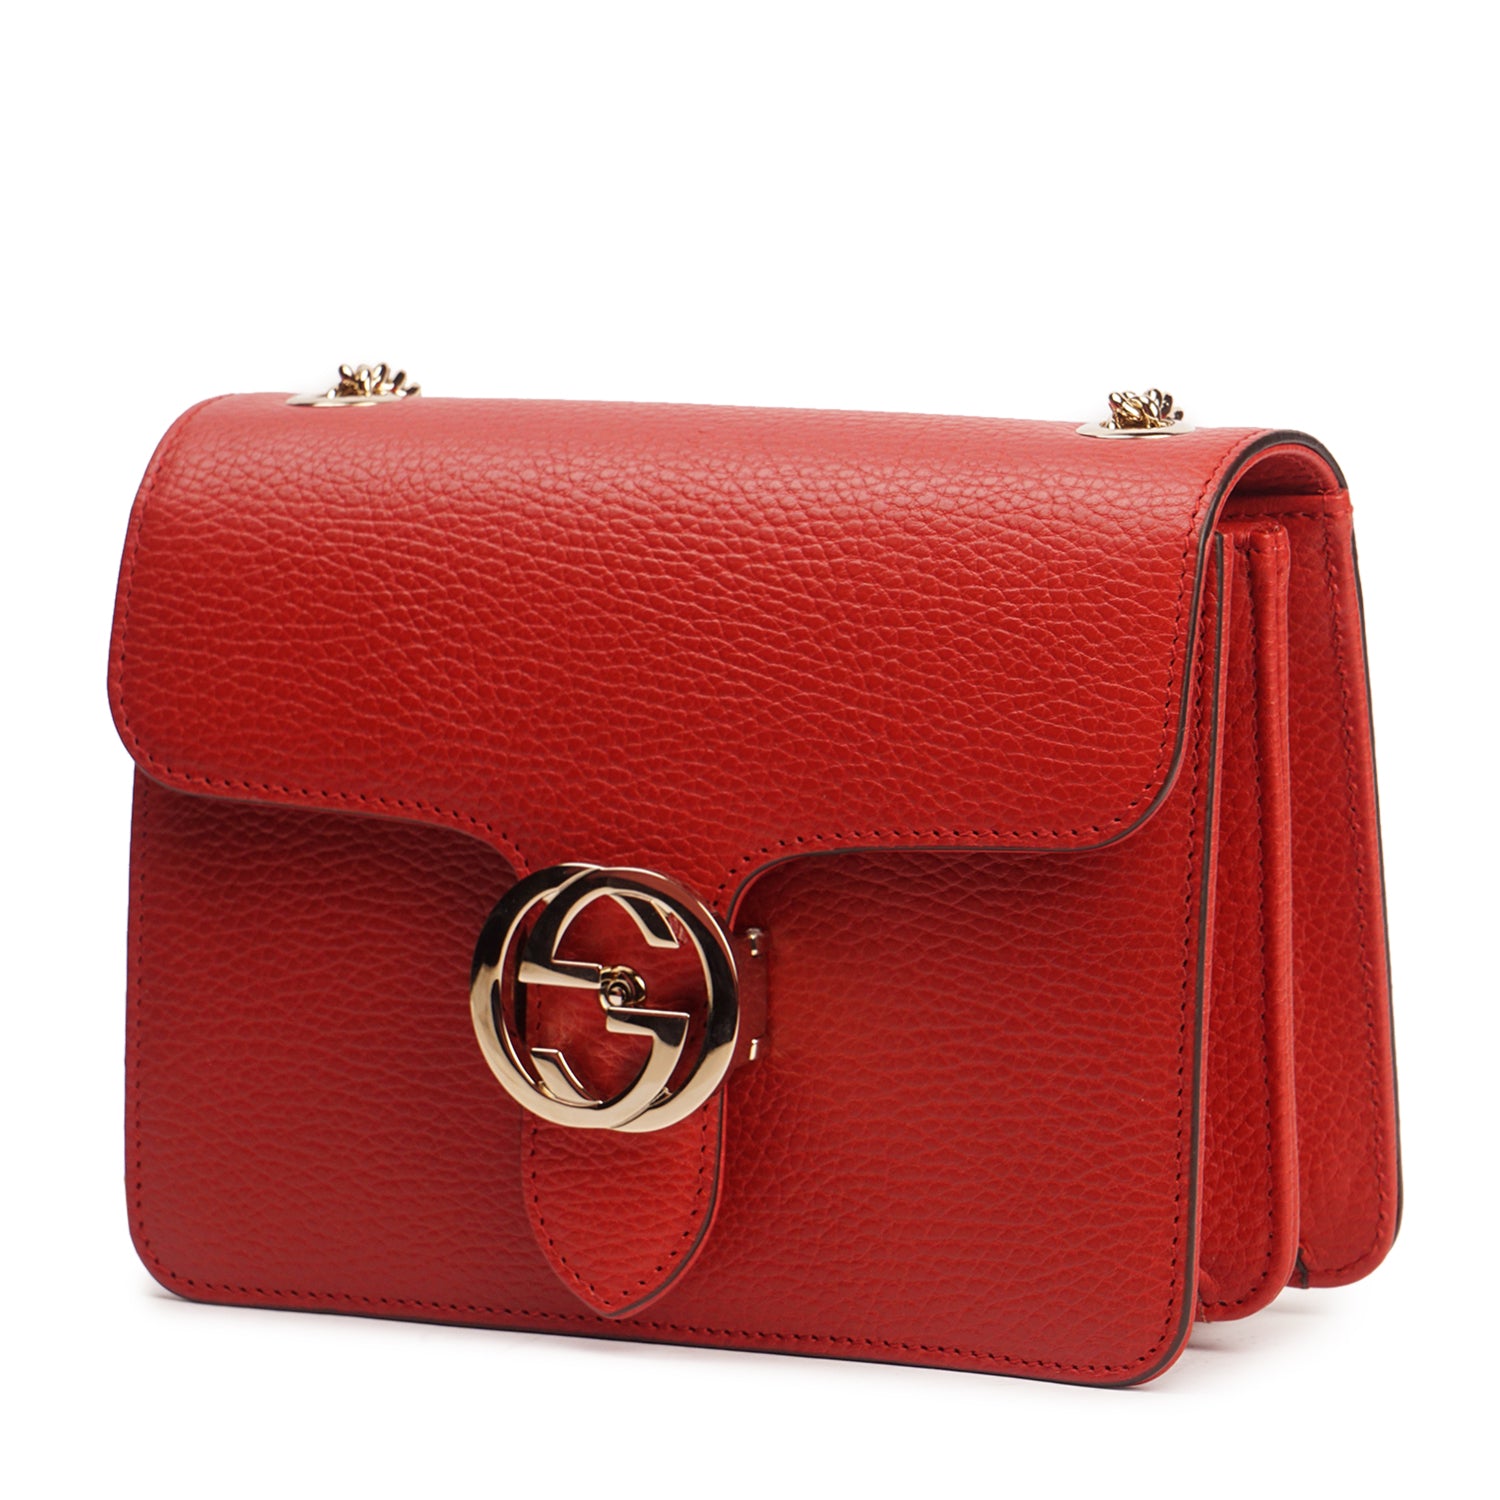 Pre-owned & Pre-loved Gucci Bags Bags for Sale - Shop Prestige